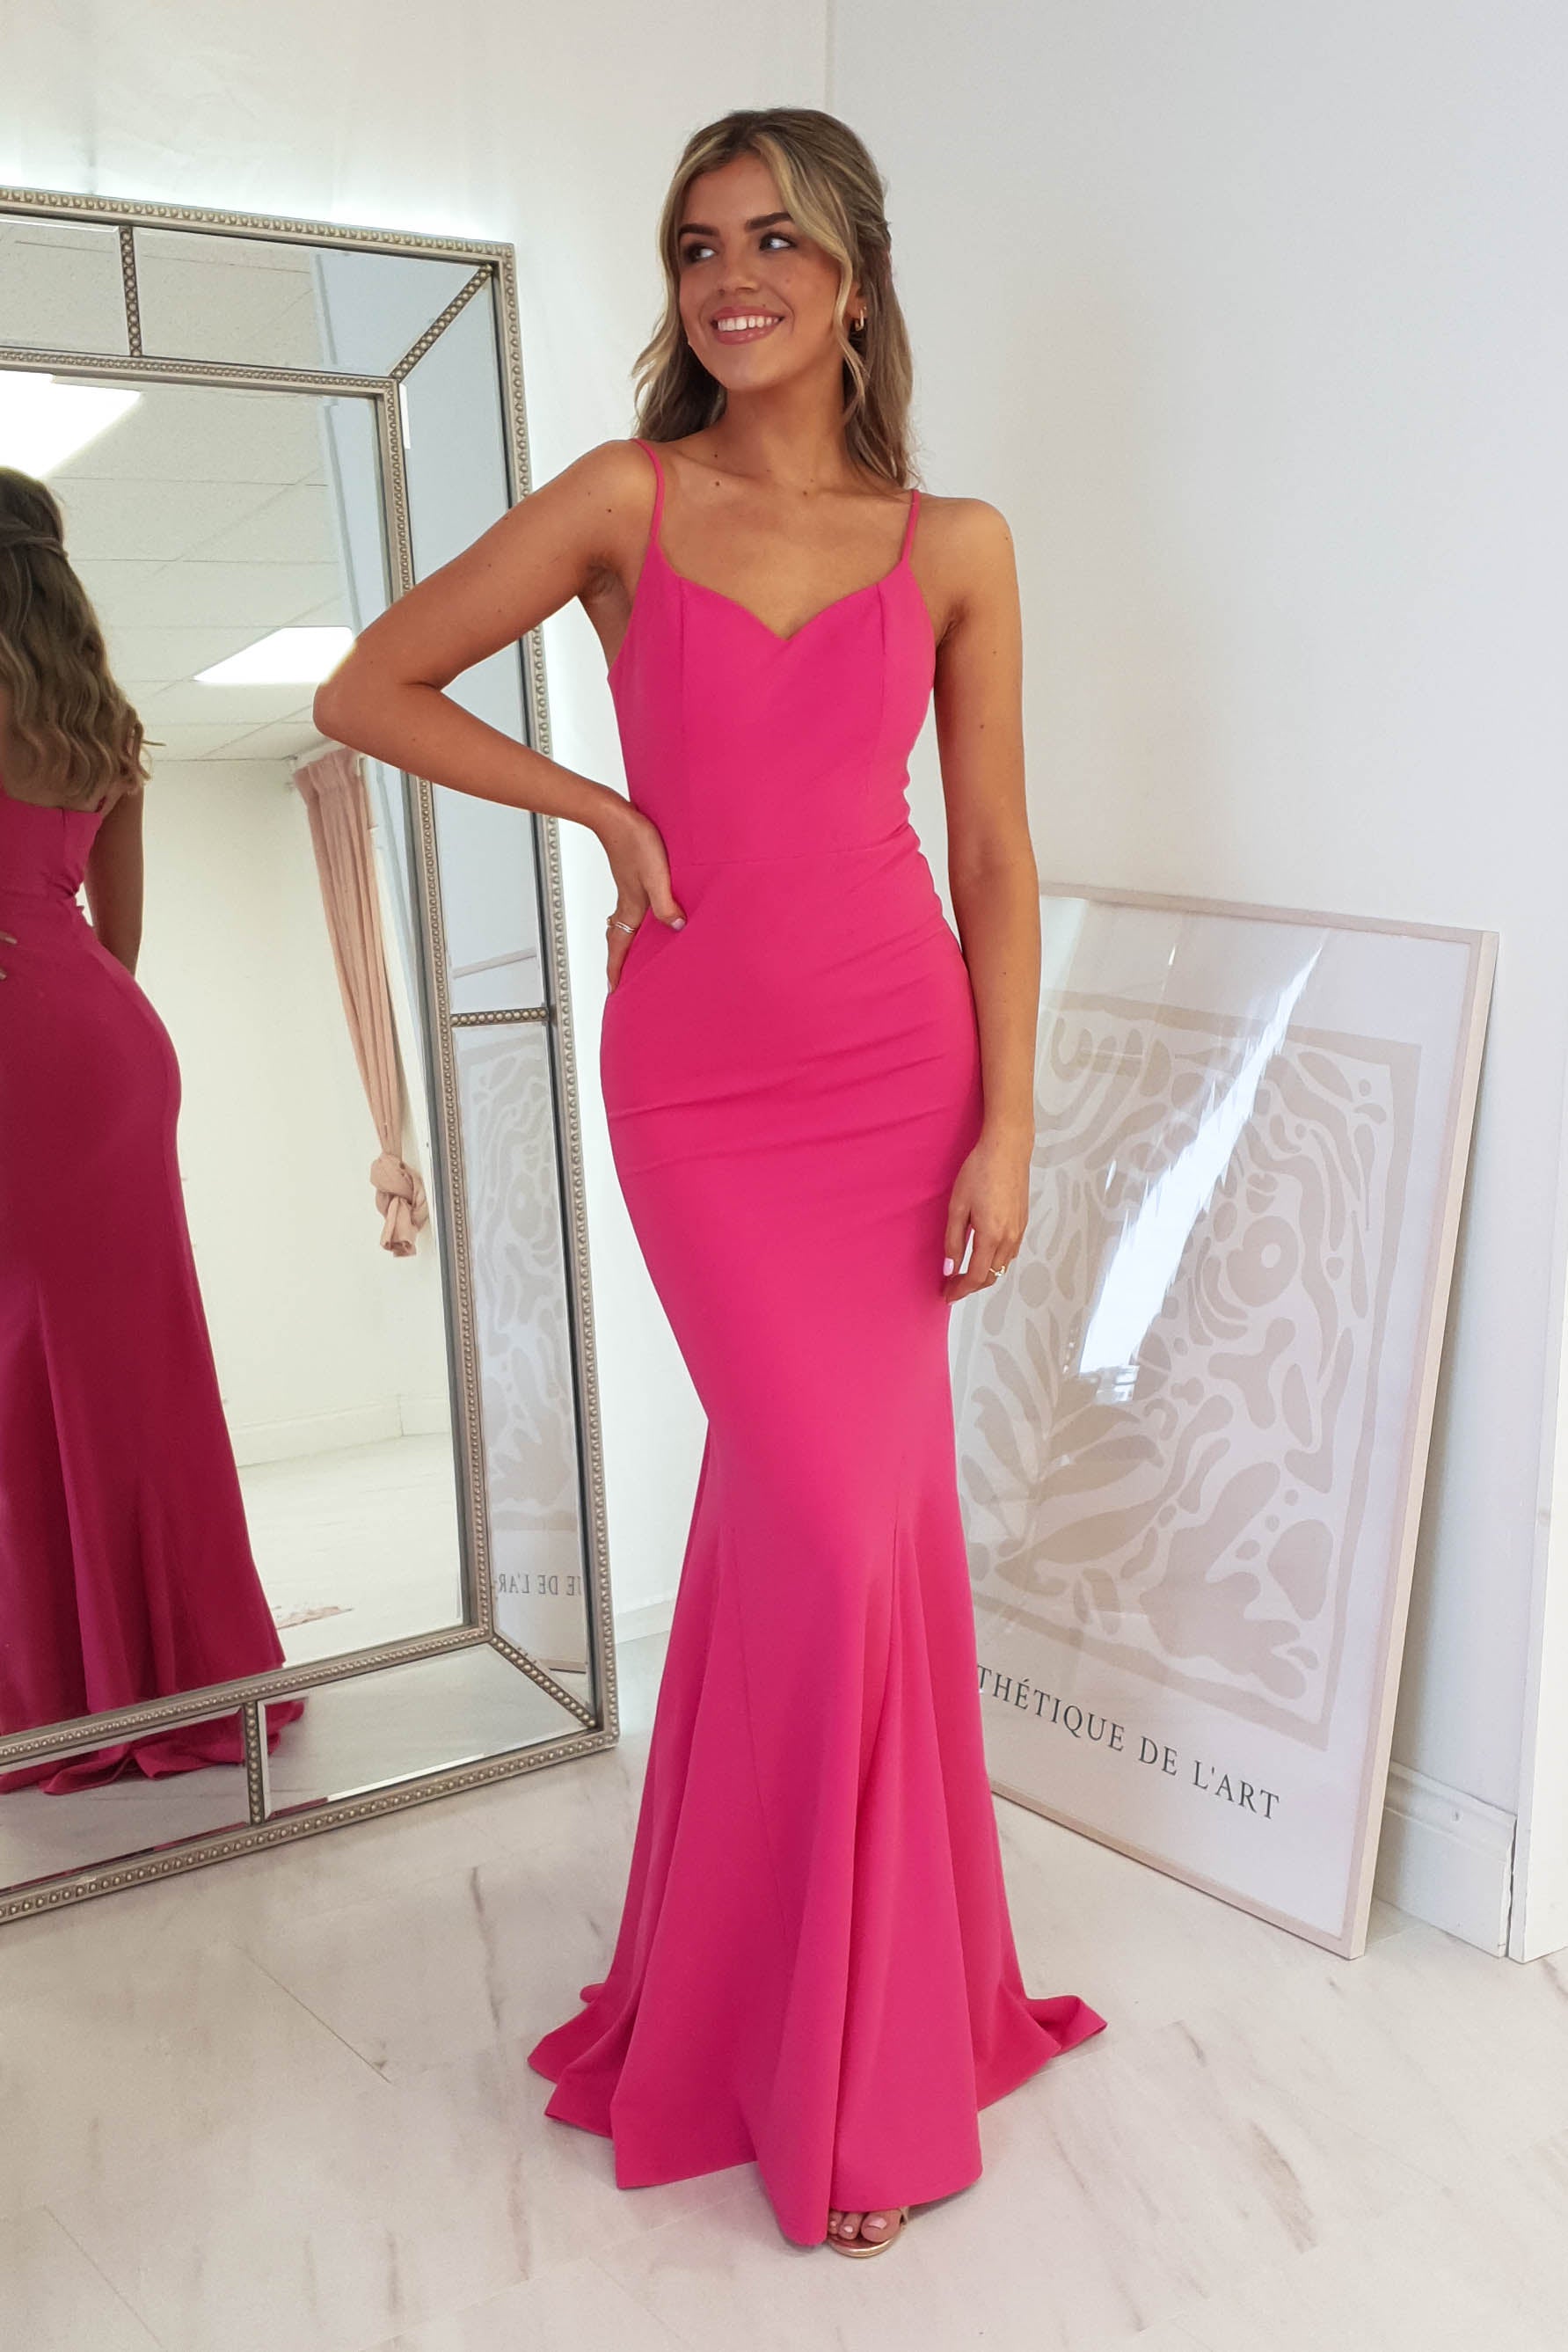 done-12767-2-hot-pink-gown-with-built-in-cups-fuchsia-vera-lucy-dresses-48968056144213.jpg